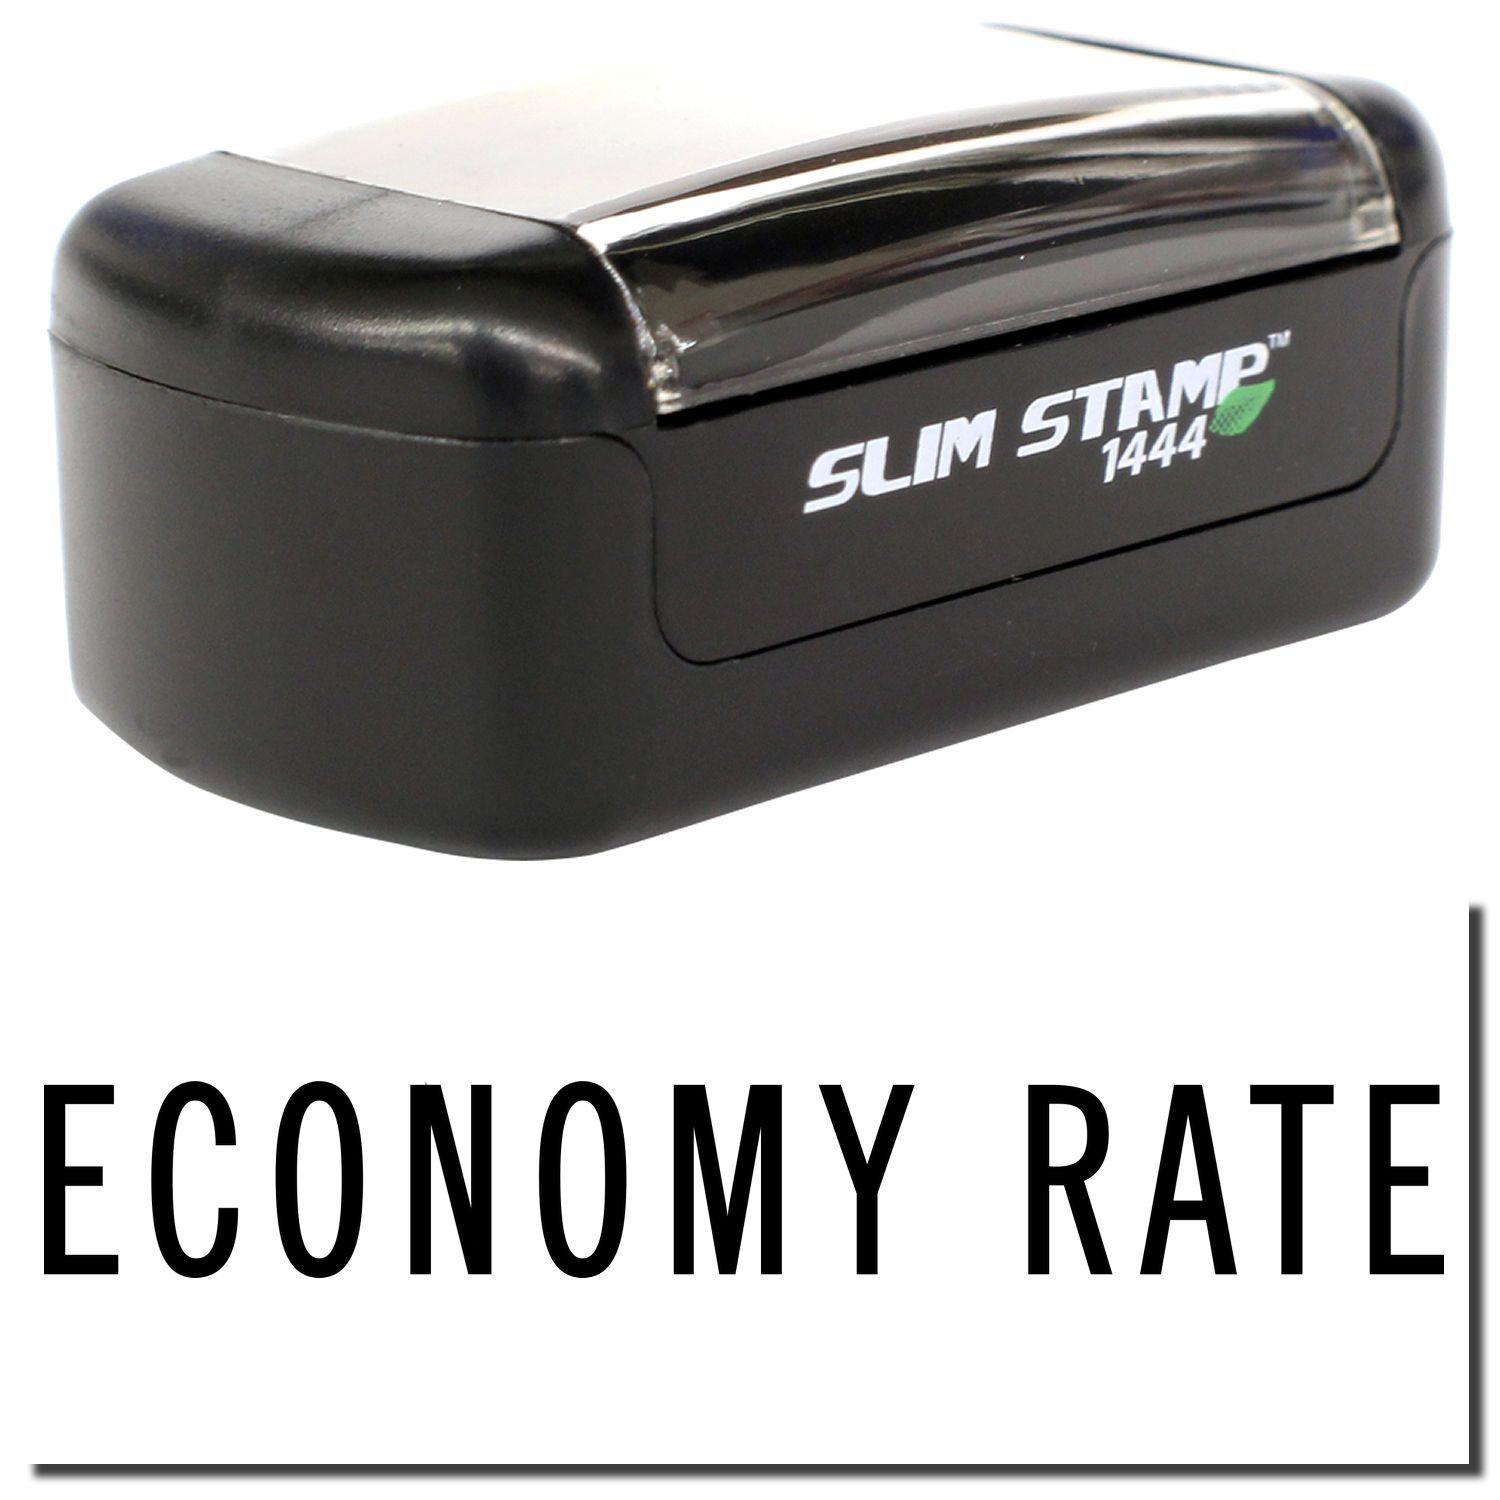 A stock office pre-inked stamp with a stamped image showing how the text "ECONOMY RATE" is displayed after stamping.